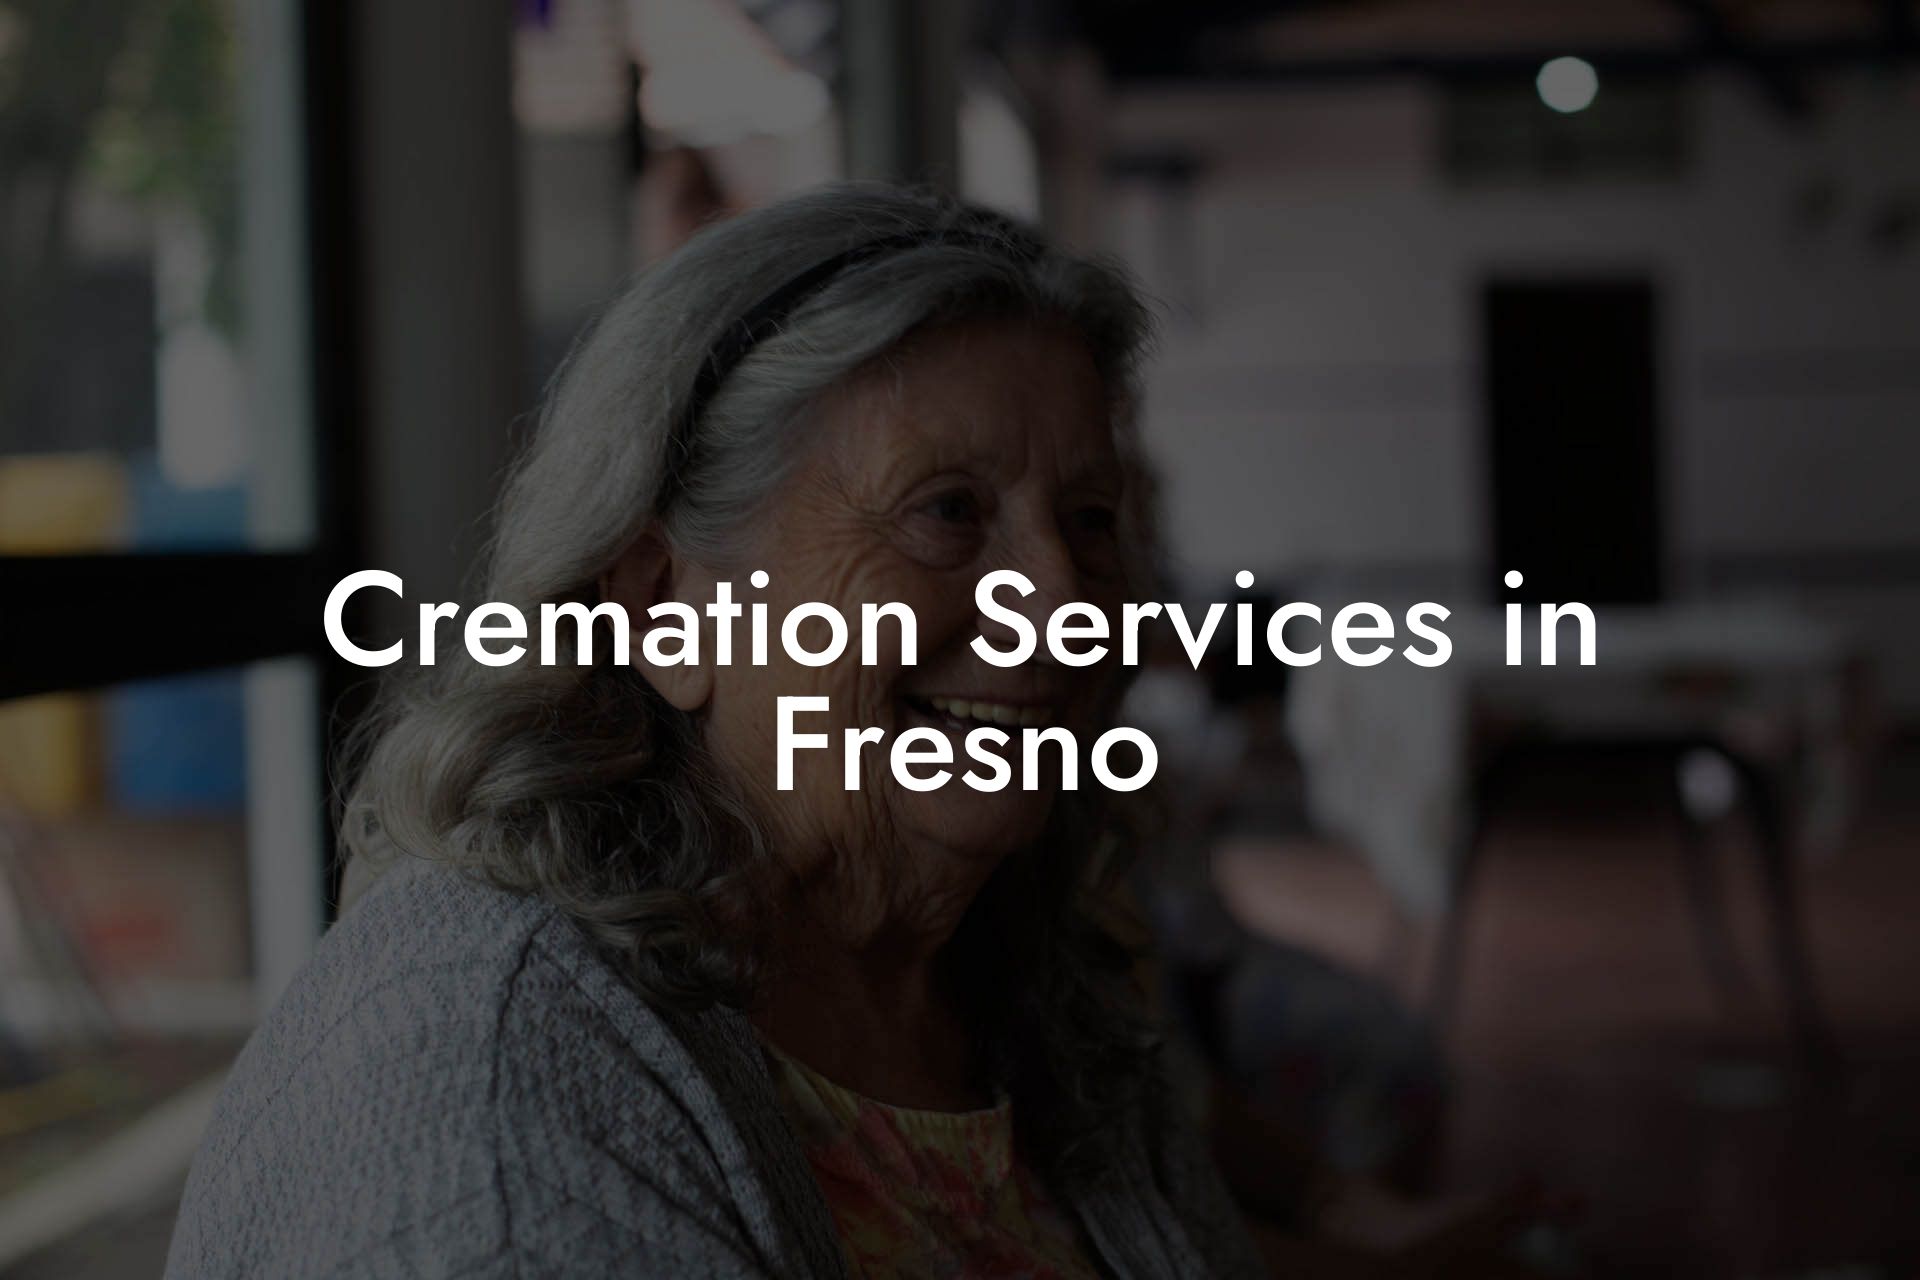 Cremation Services in Fresno